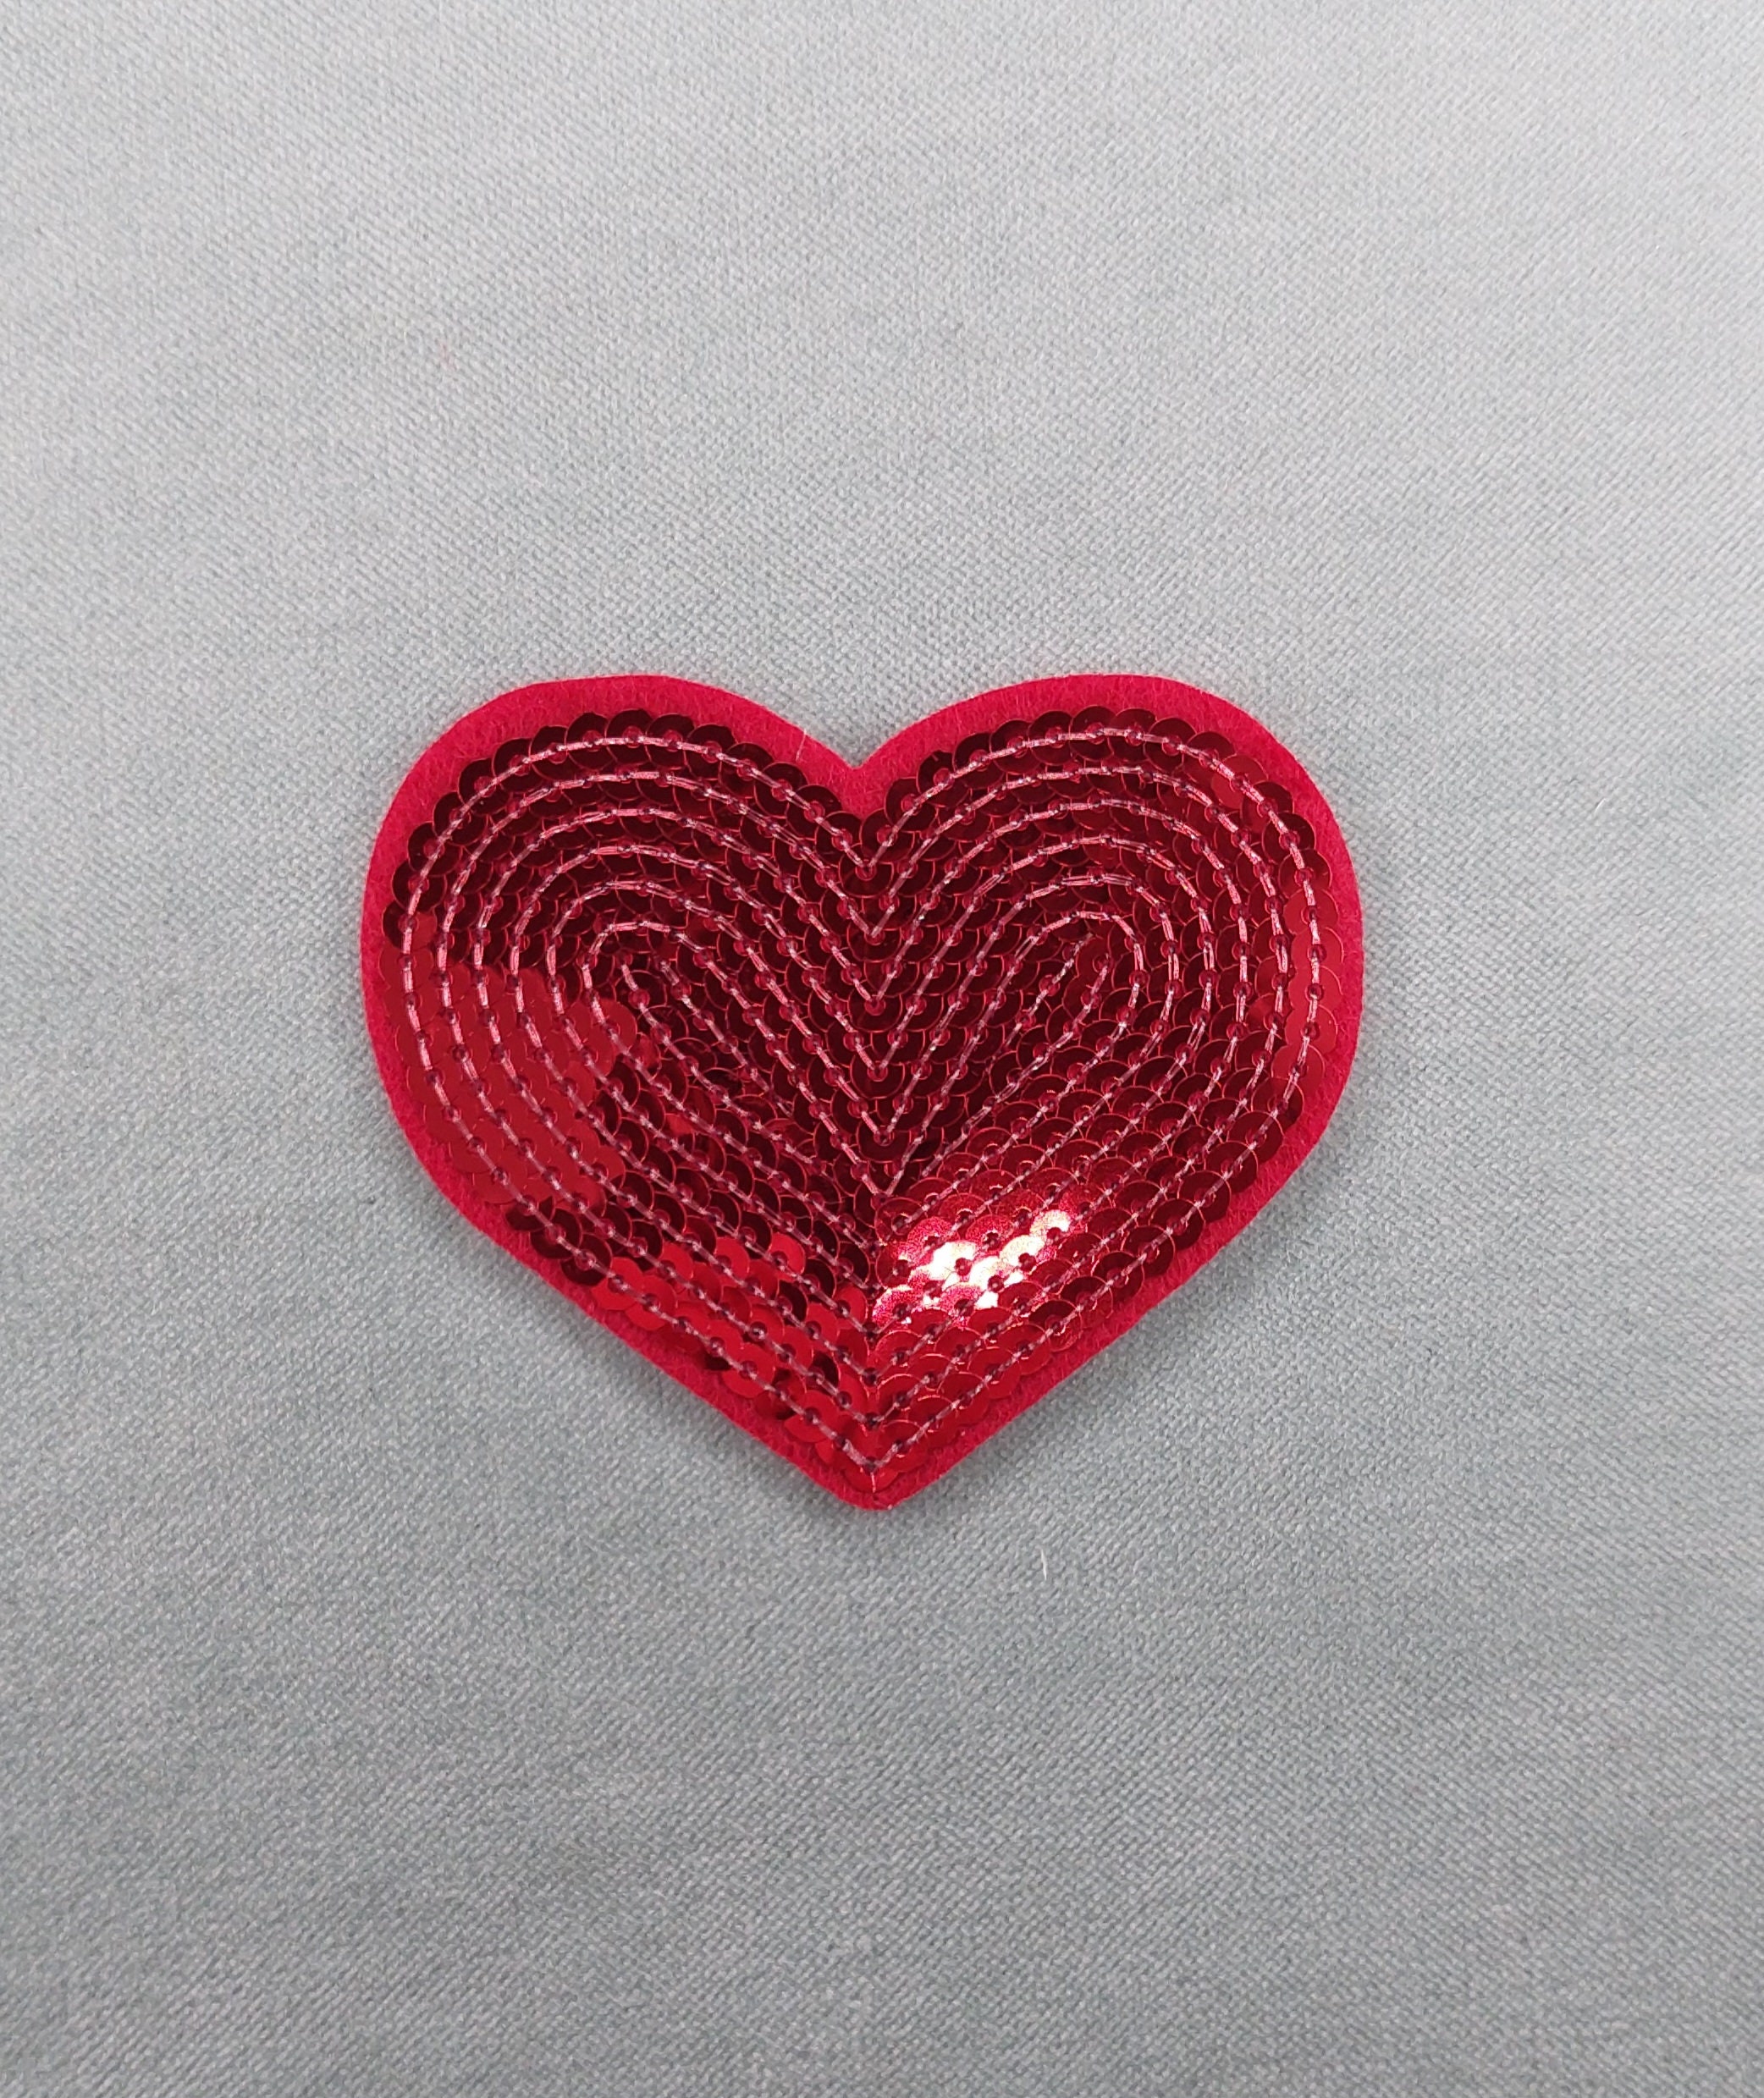 Set of 5 Sequined Heart Iron On Patches - DIY Fabric Decoration